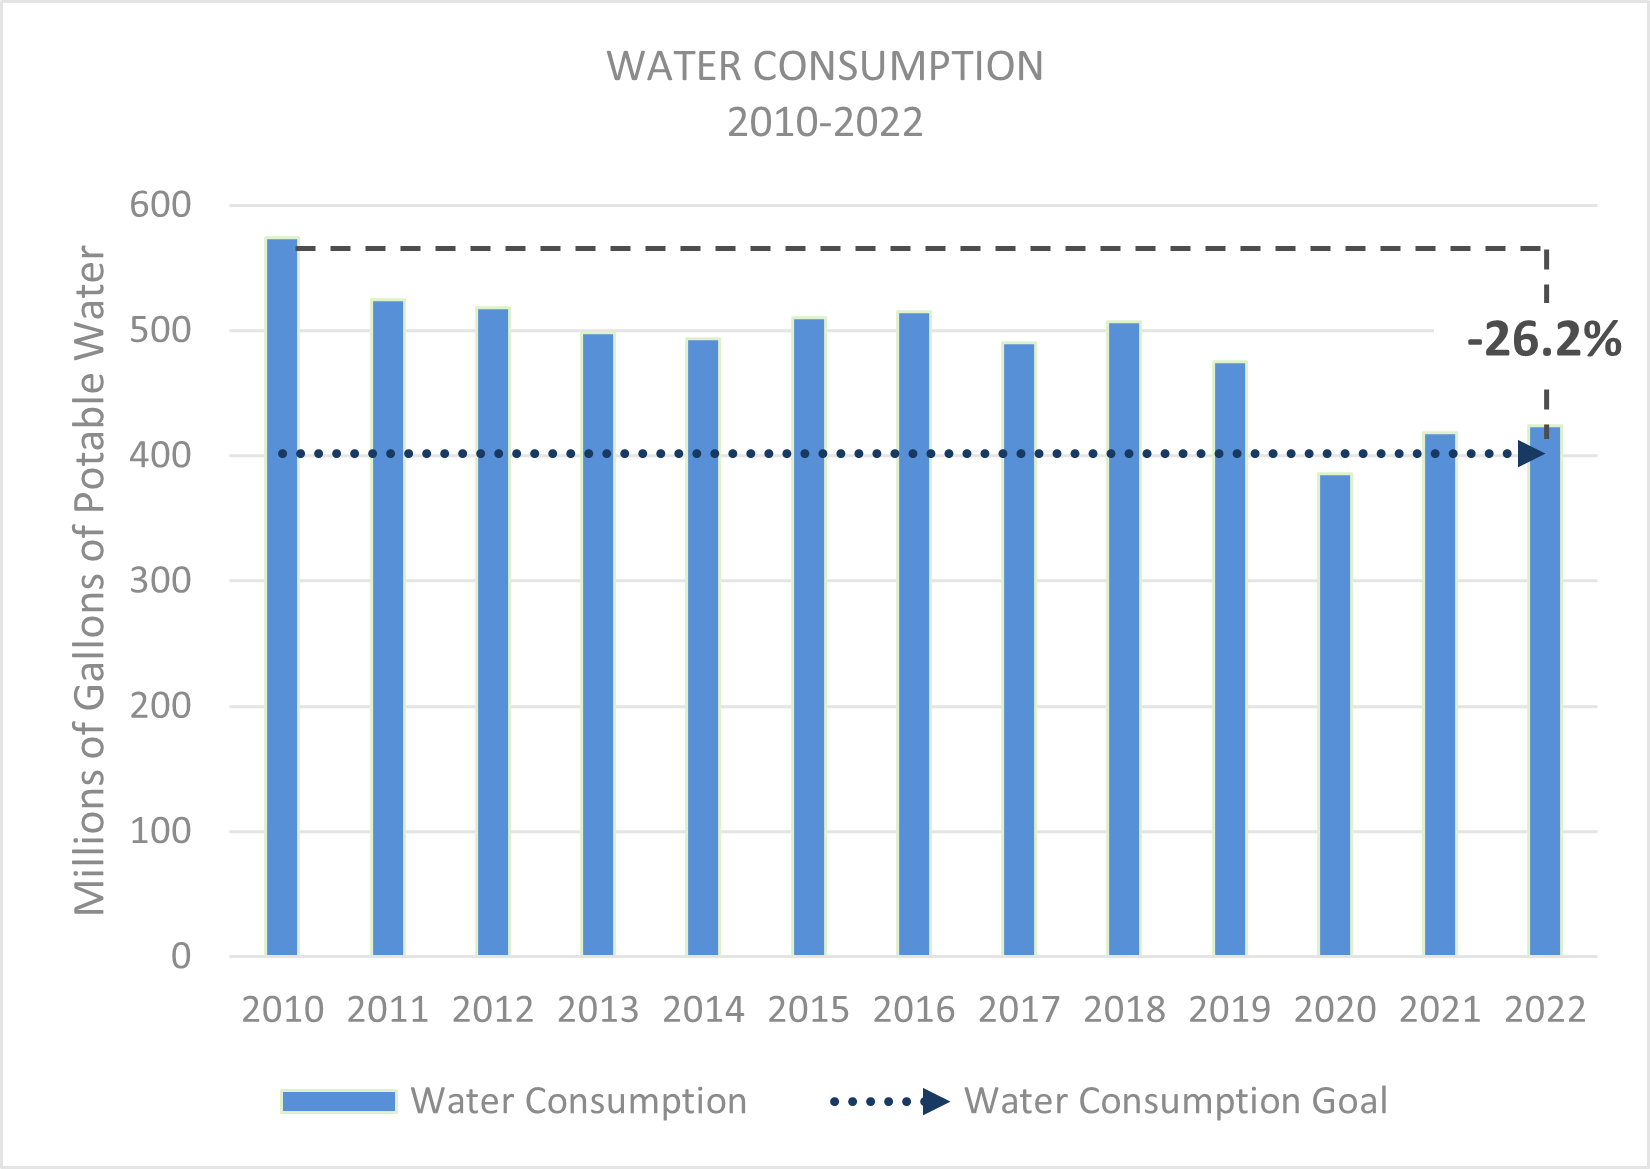 Graph showing 26.2% reduction in UVA's water consumption